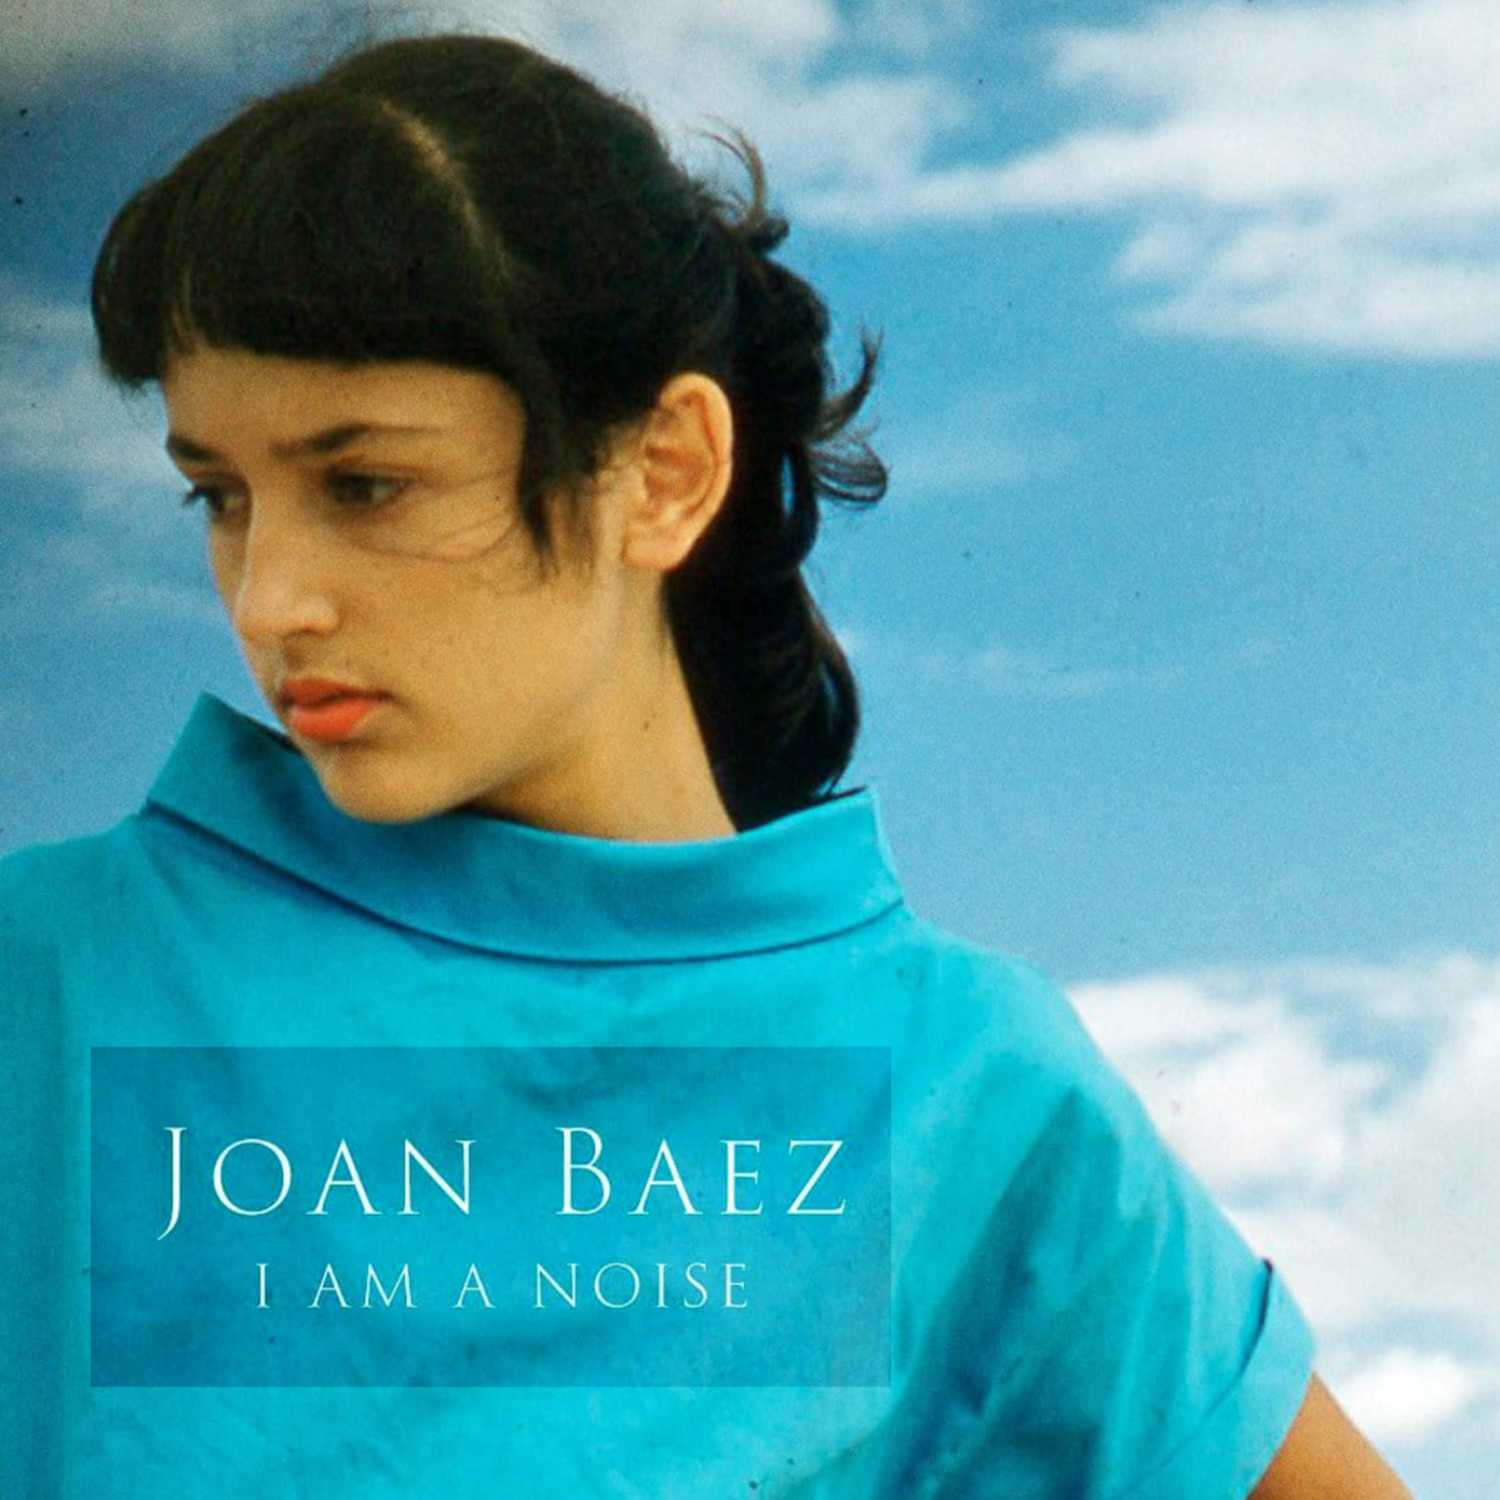 Joan Baez I Am A Noise Documentary Interview with the 3 Film Directors